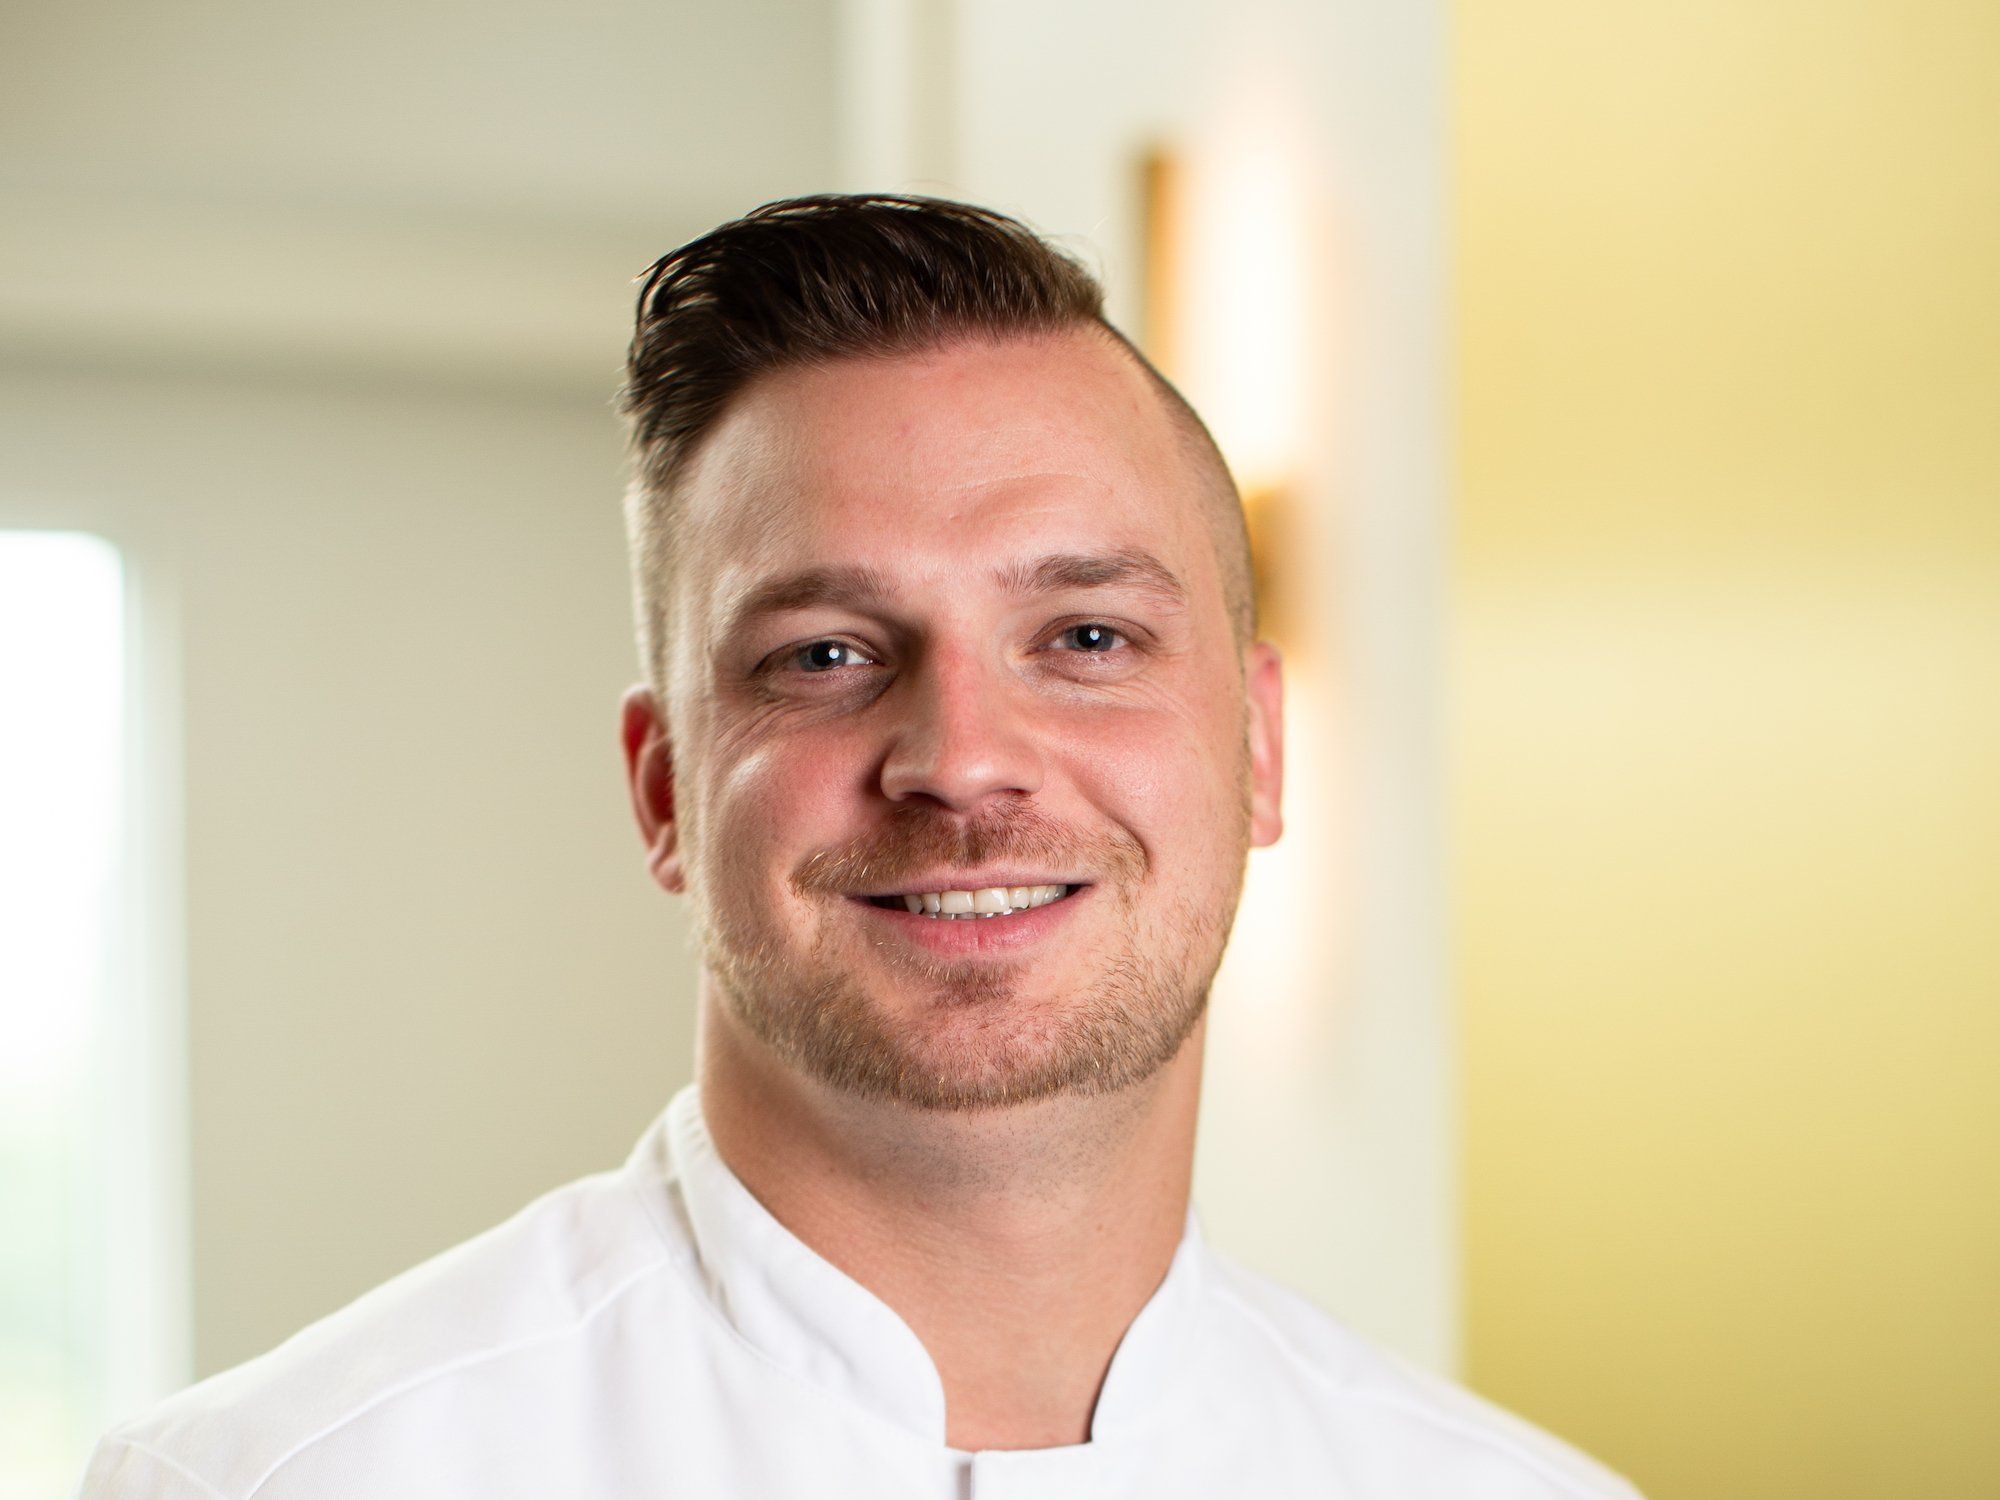 Rising star chef takes his talents to hotly anticipated new River Oaks ...